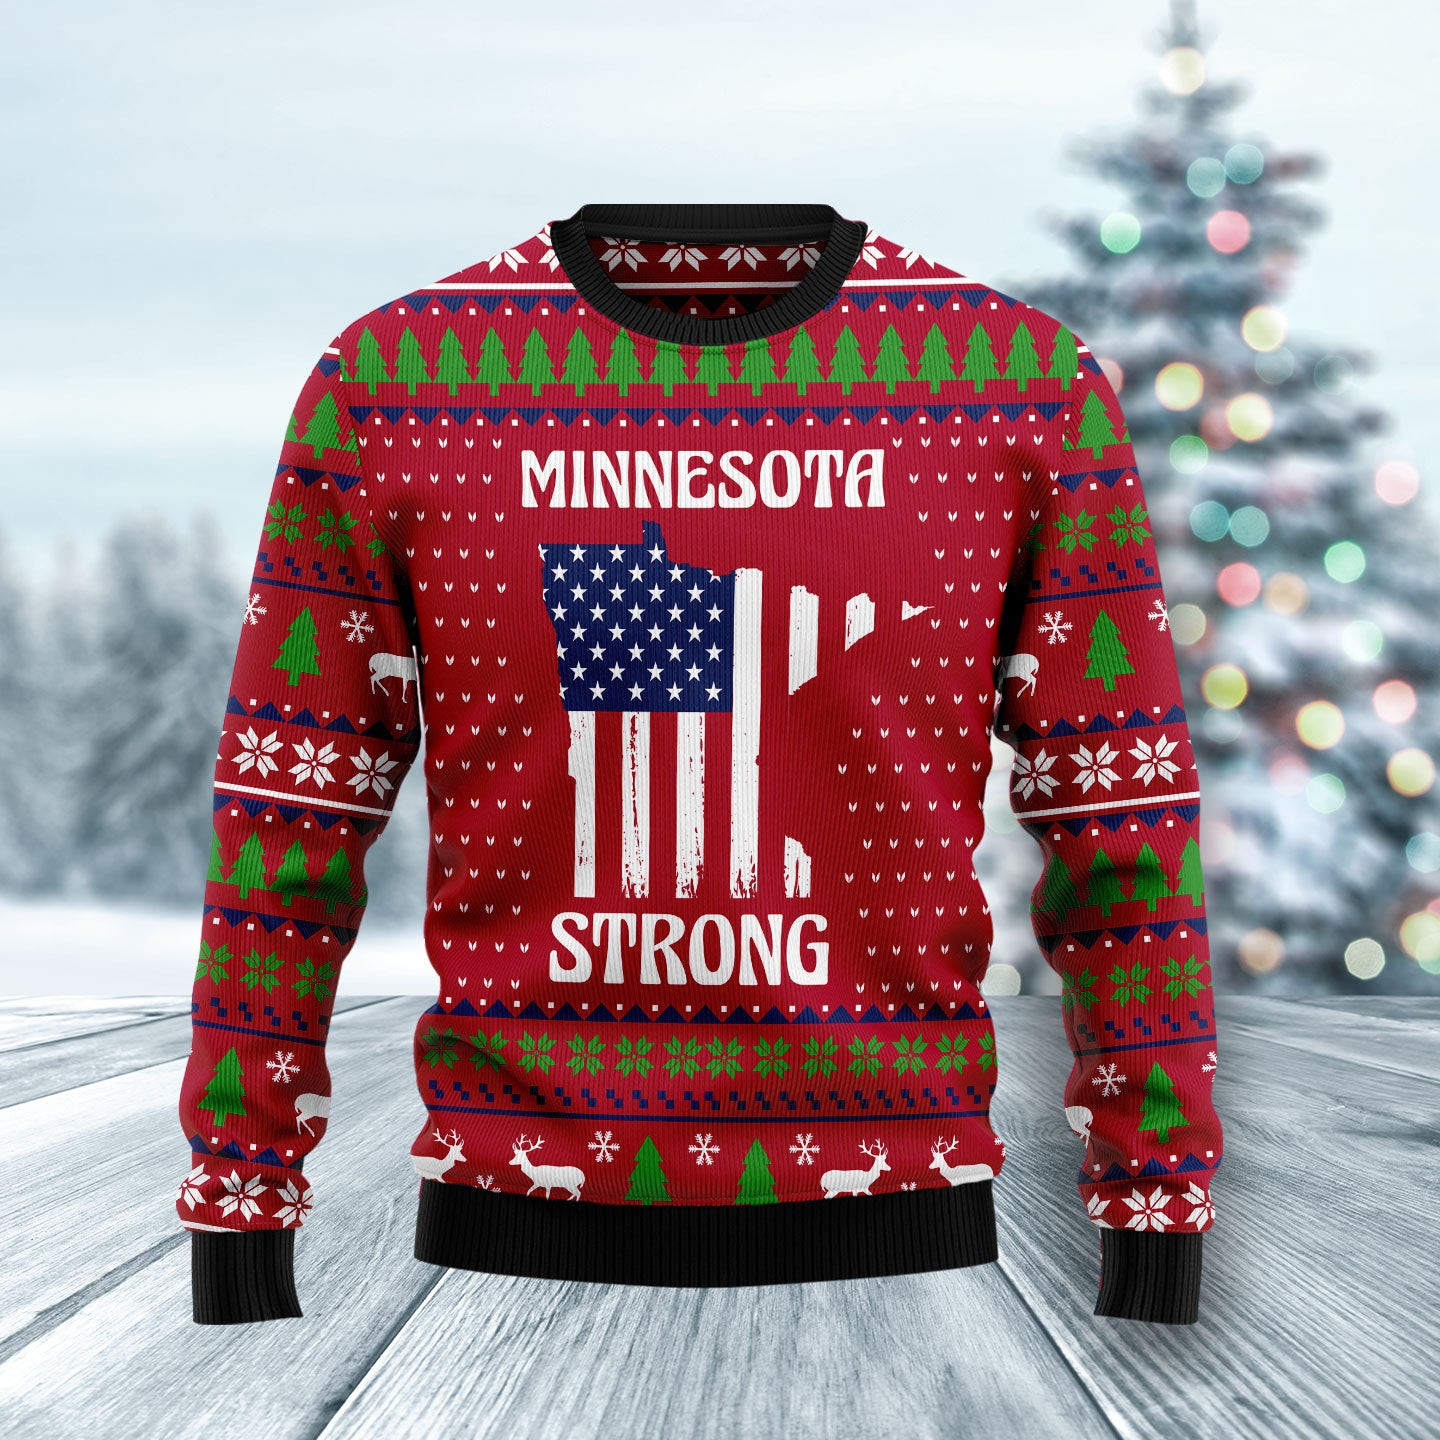 Minnesota Strong Ugly Christmas Sweater, Ugly Sweater For Men Women, Holiday Sweater